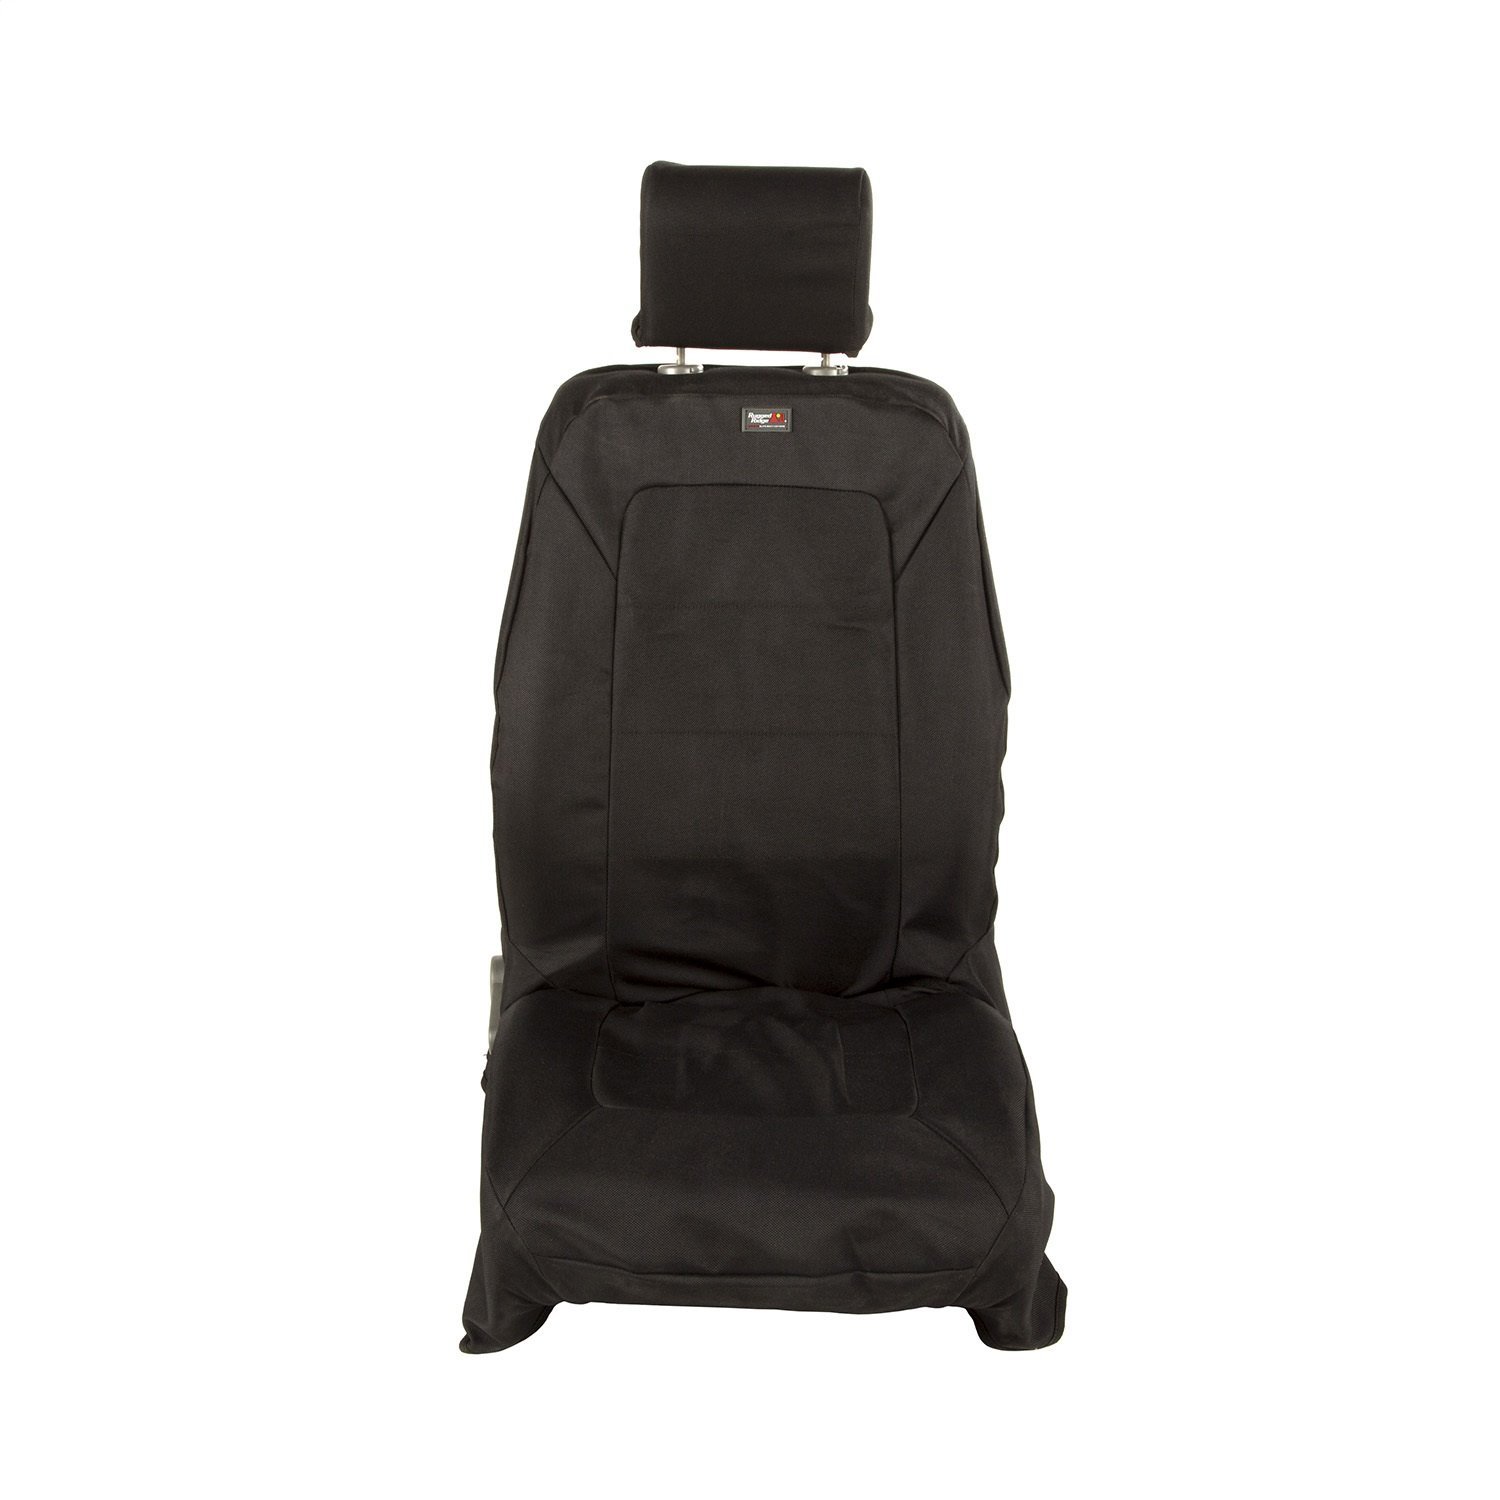 Elite Ballistic Front Heated Seat Cover Kit for